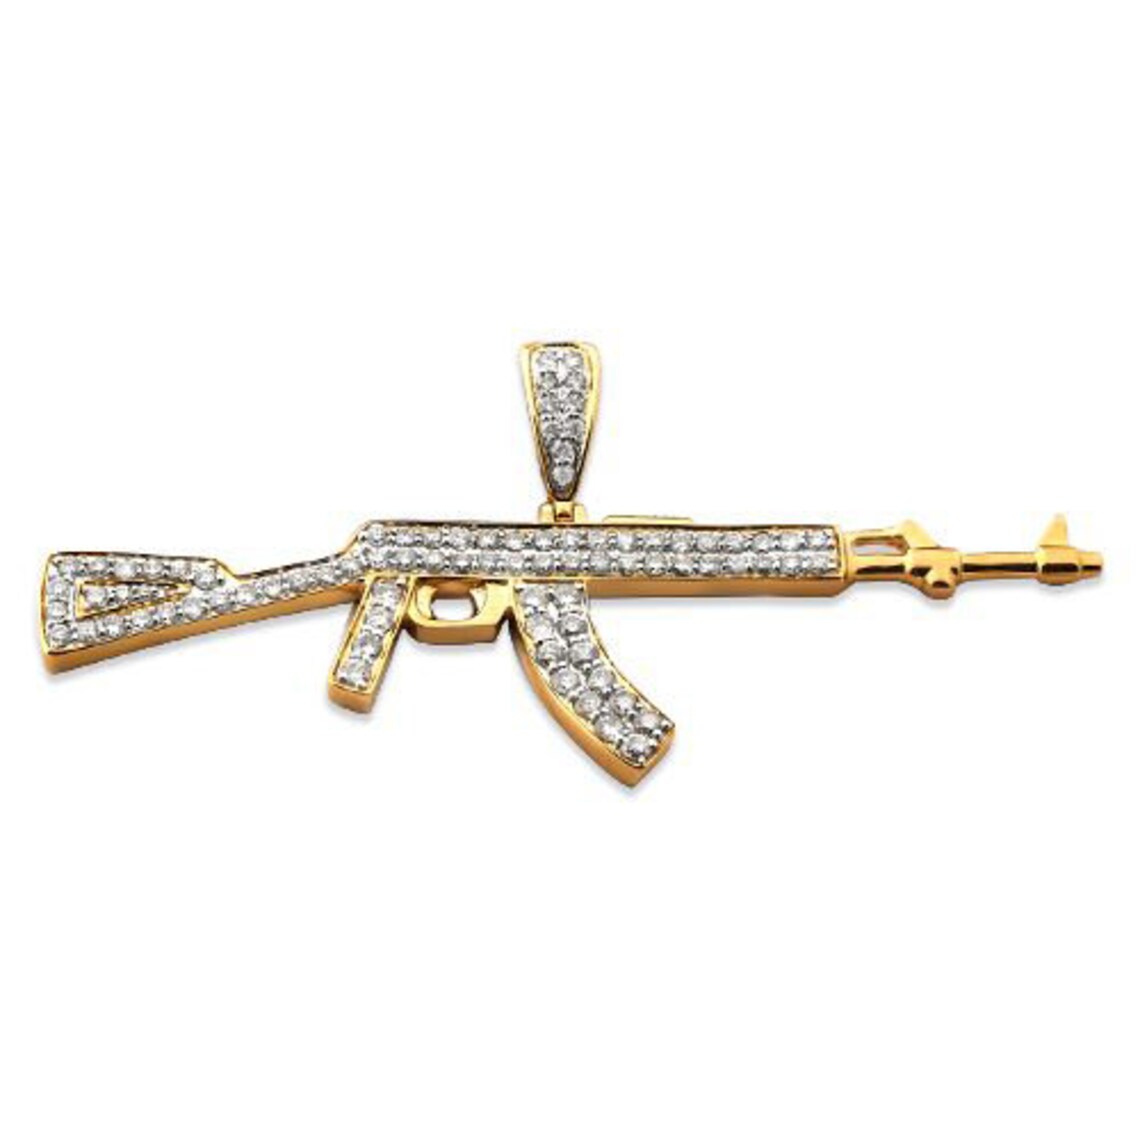 Buy 14k Yellow Gold Solid Ak-47 Rifle Pendant Online at SO ICY JEWELRY